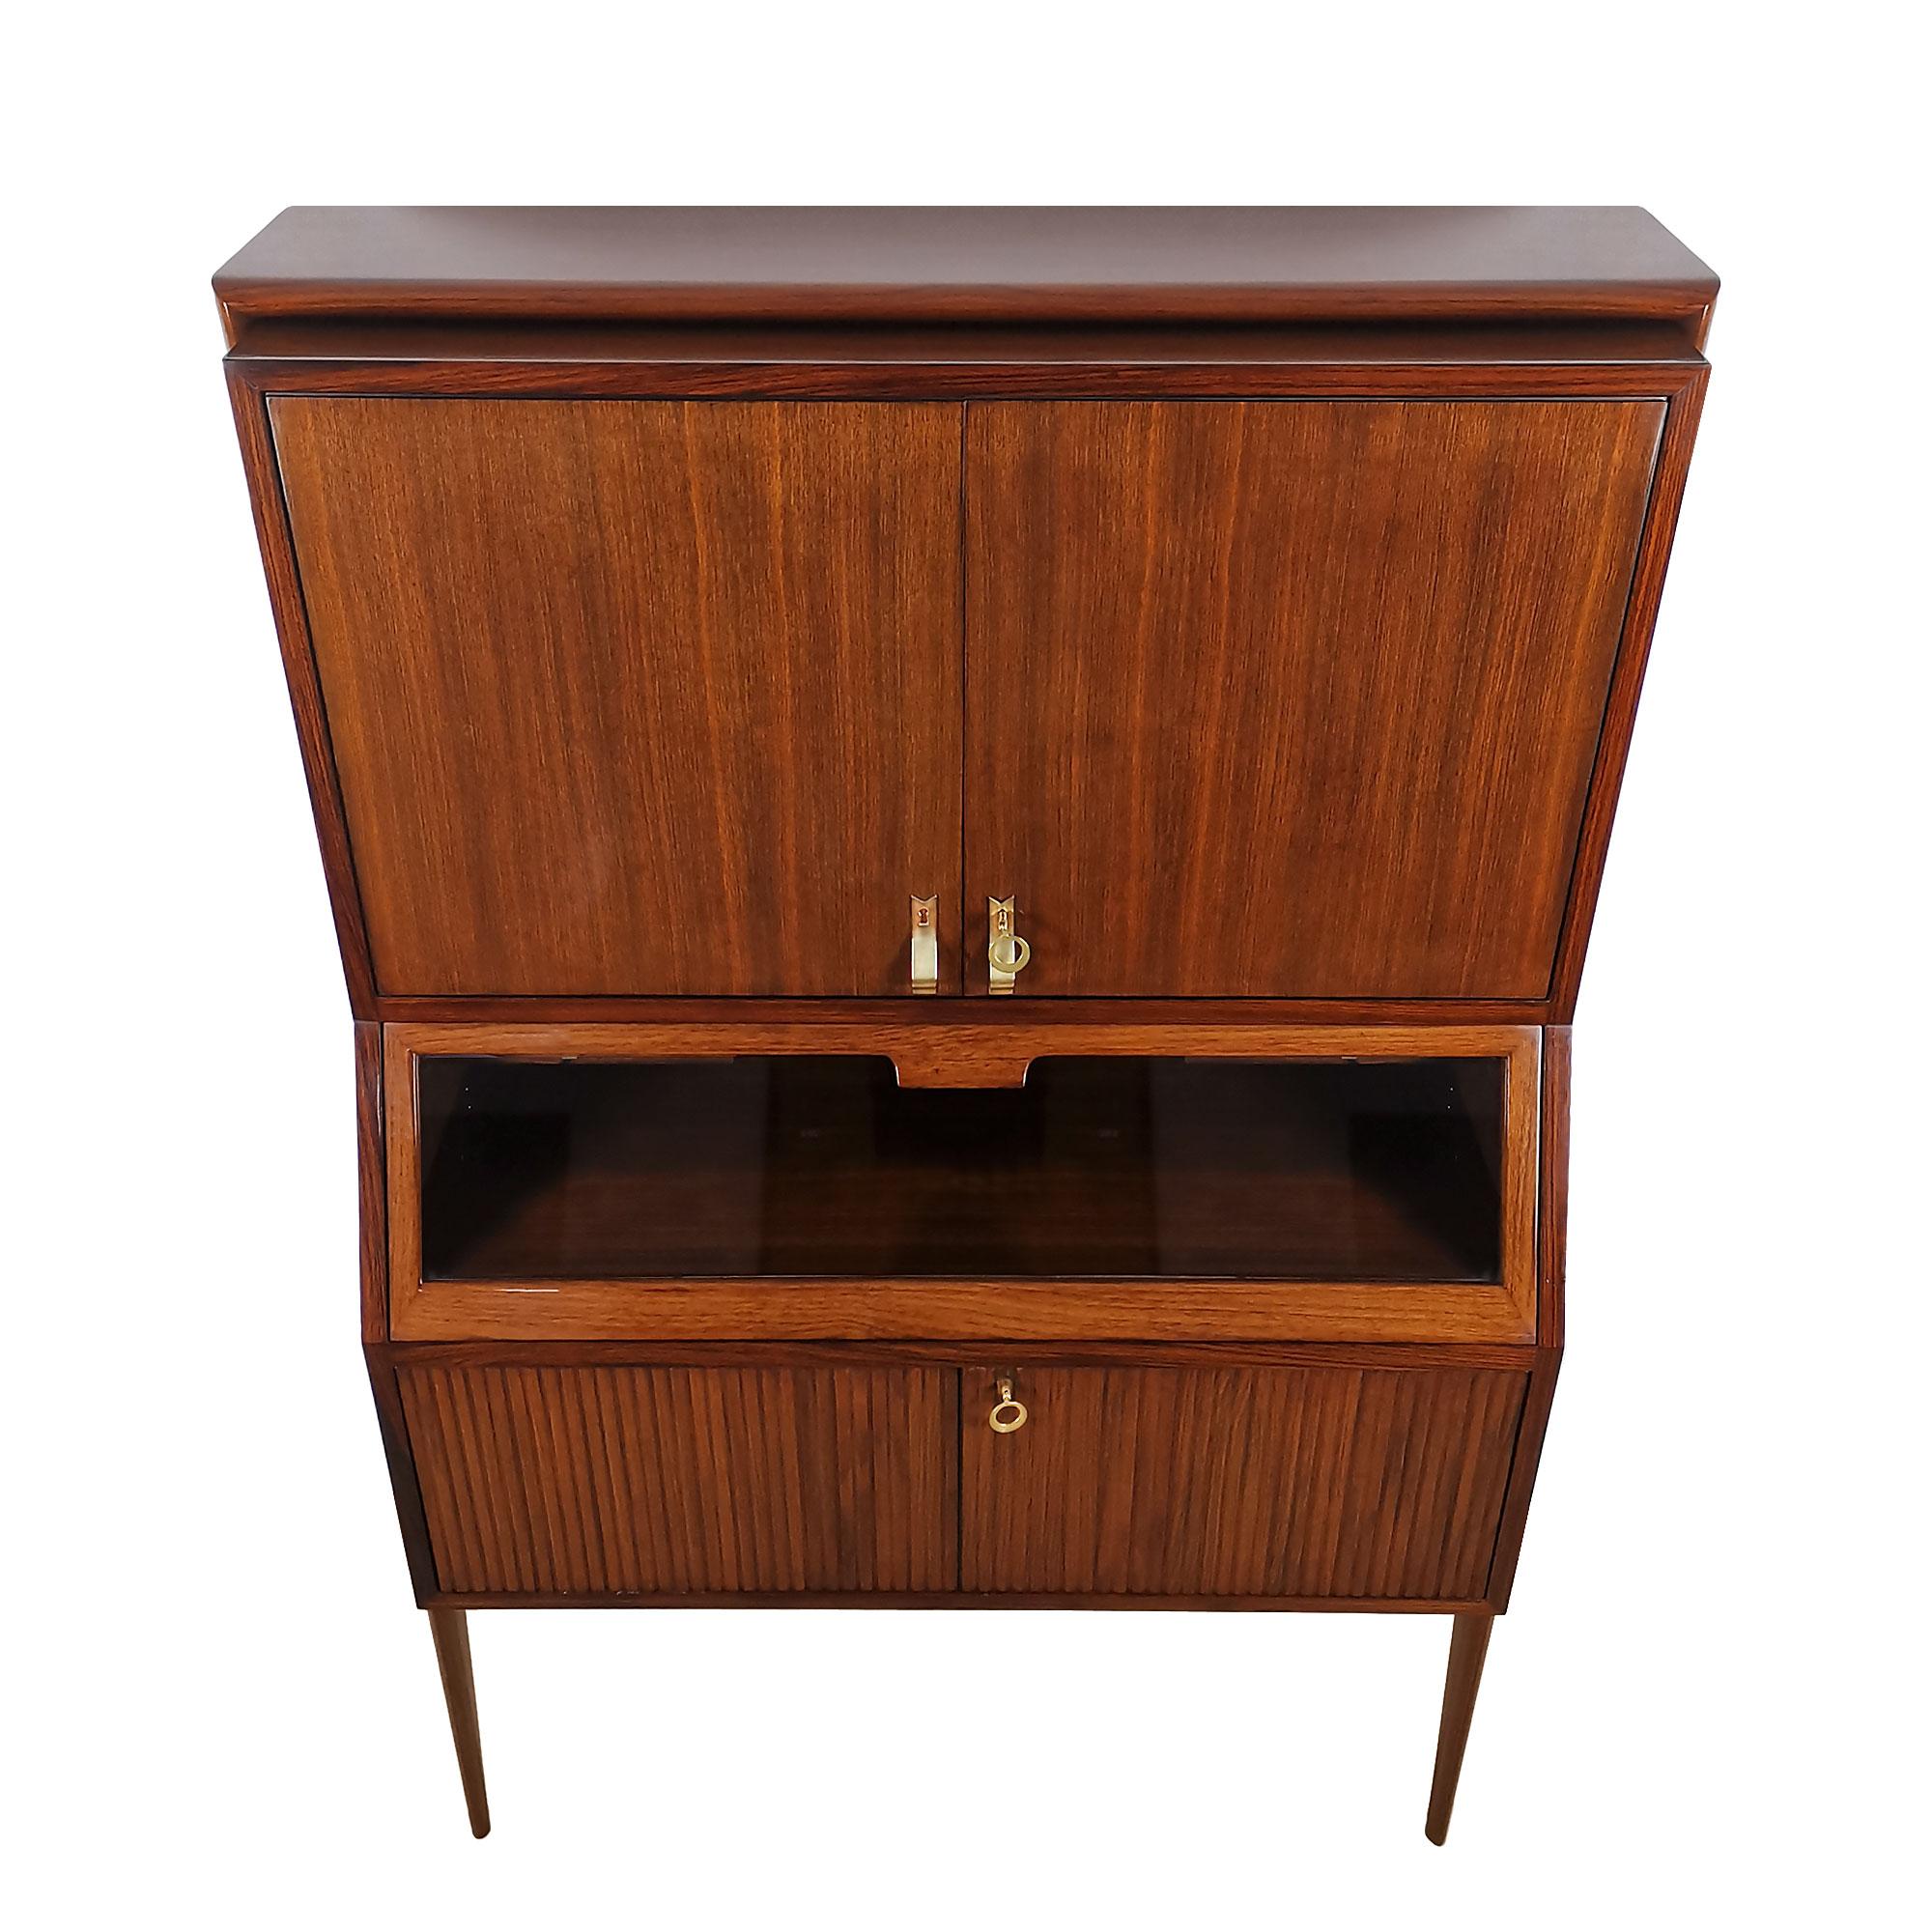 Italian Mid-Century Modern Dry Bar by Ico Parisi in Mahogany, Glass, Brass - Italy For Sale